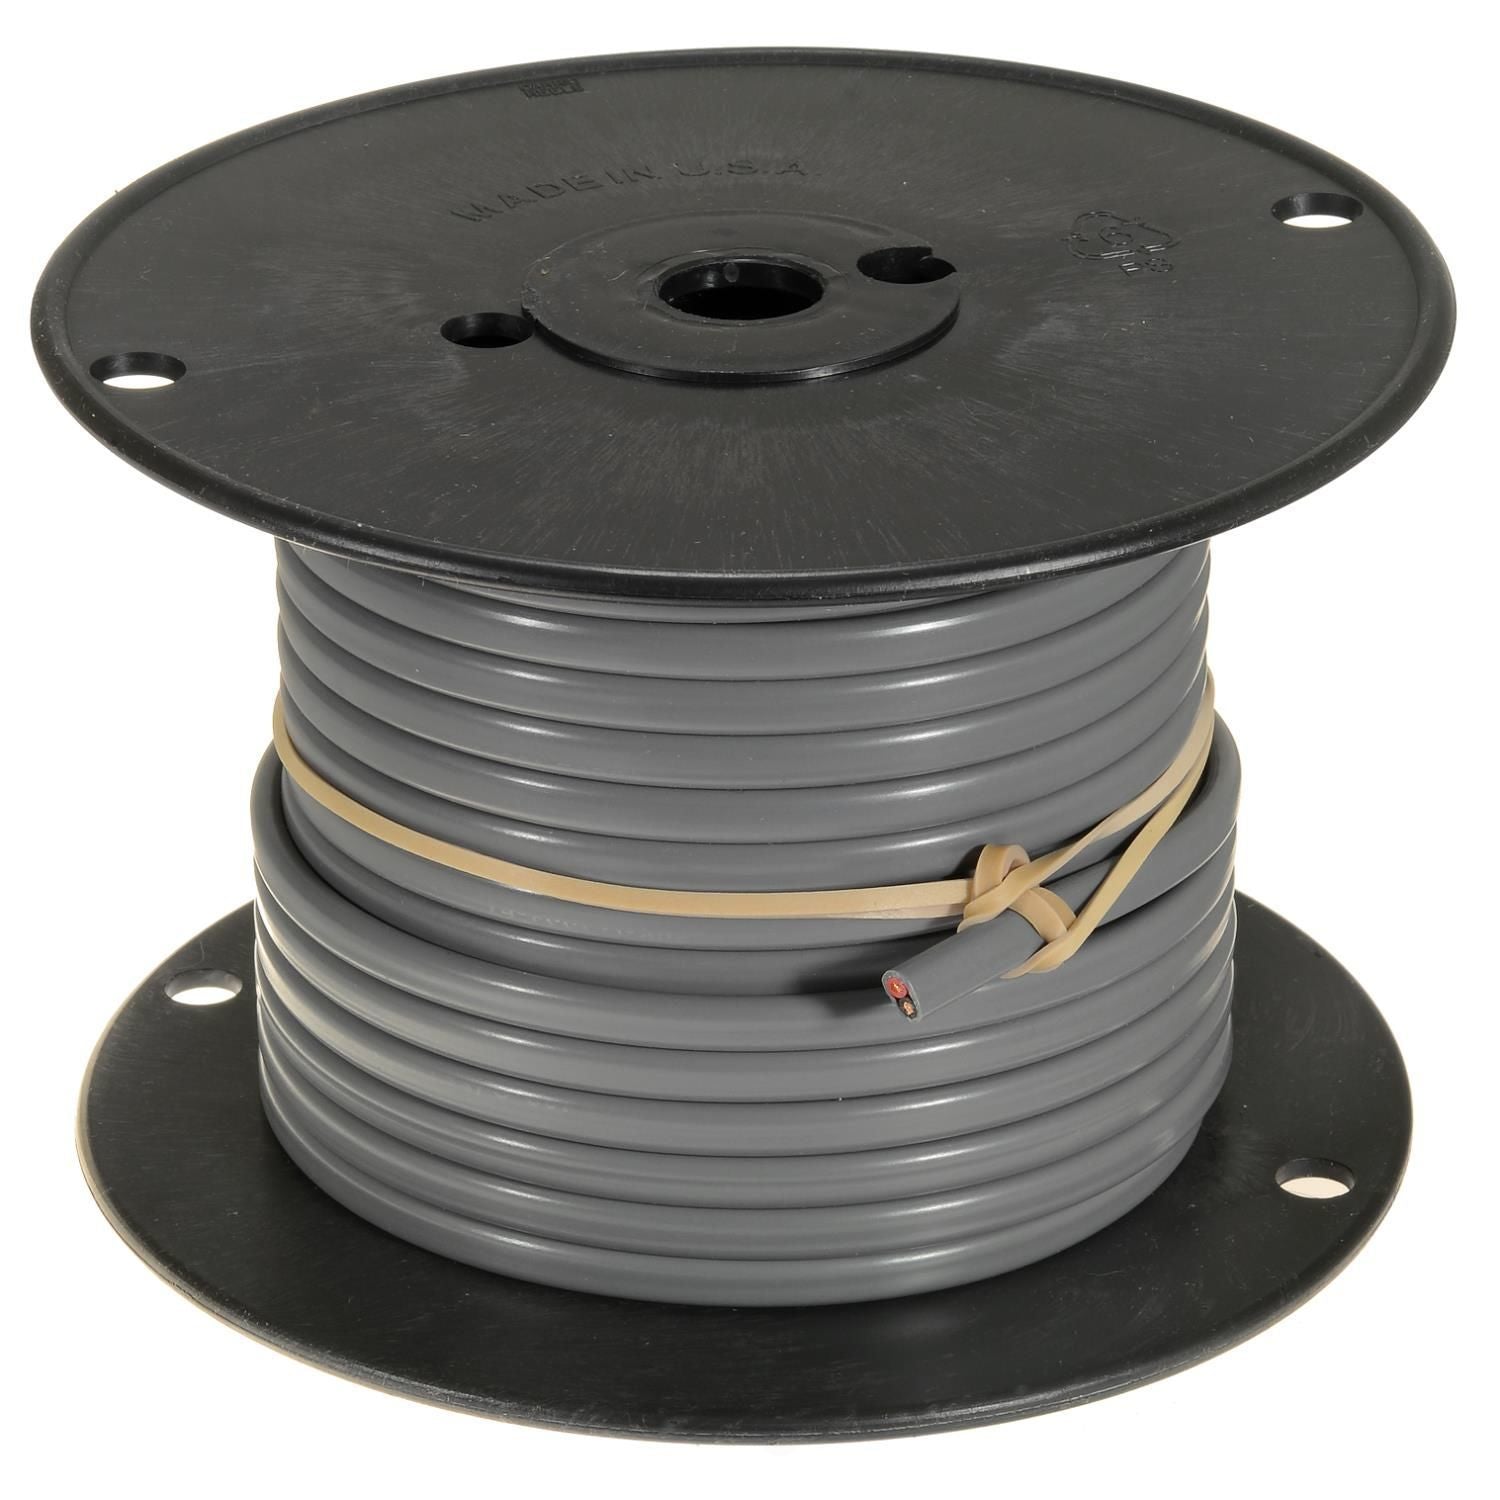 YSP WR121-100 Wells Flat Multi-Conductor Primary Wire (14G, 2 Wire)